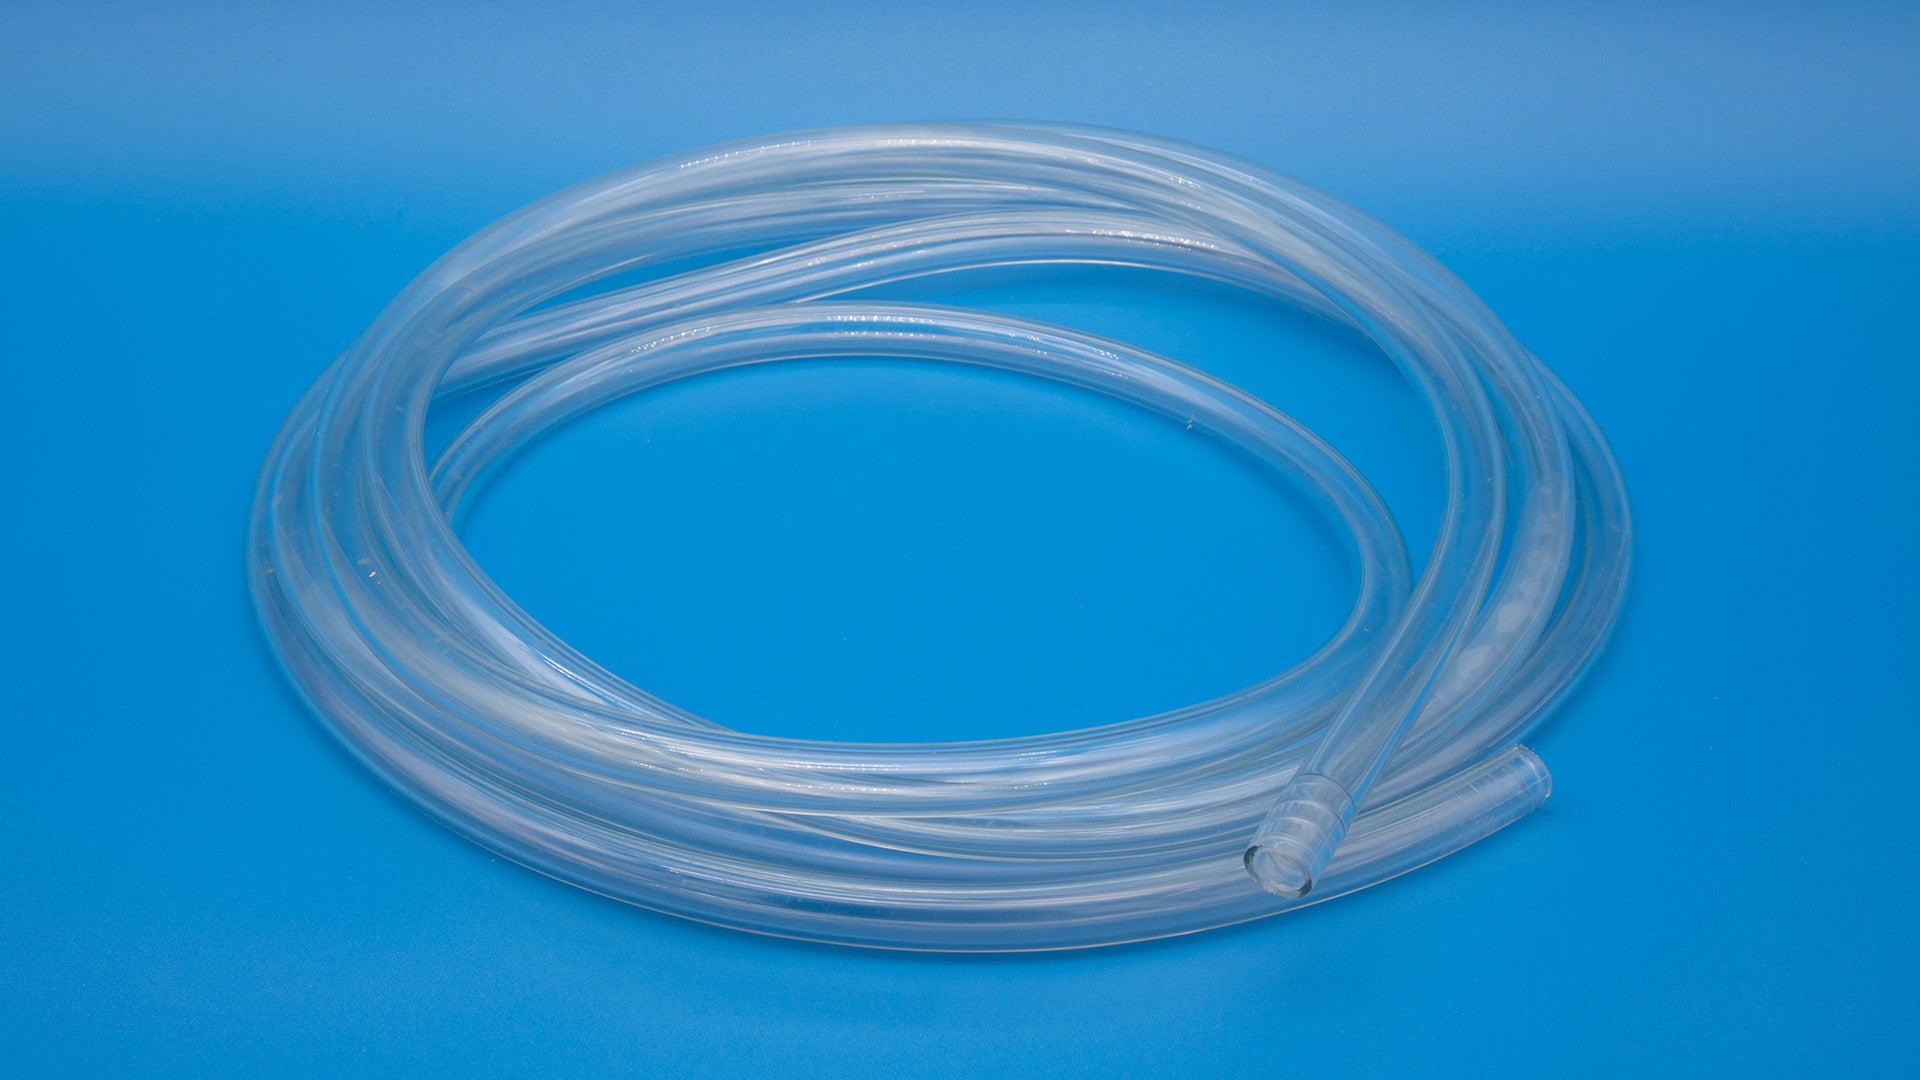 Length of clear tubing